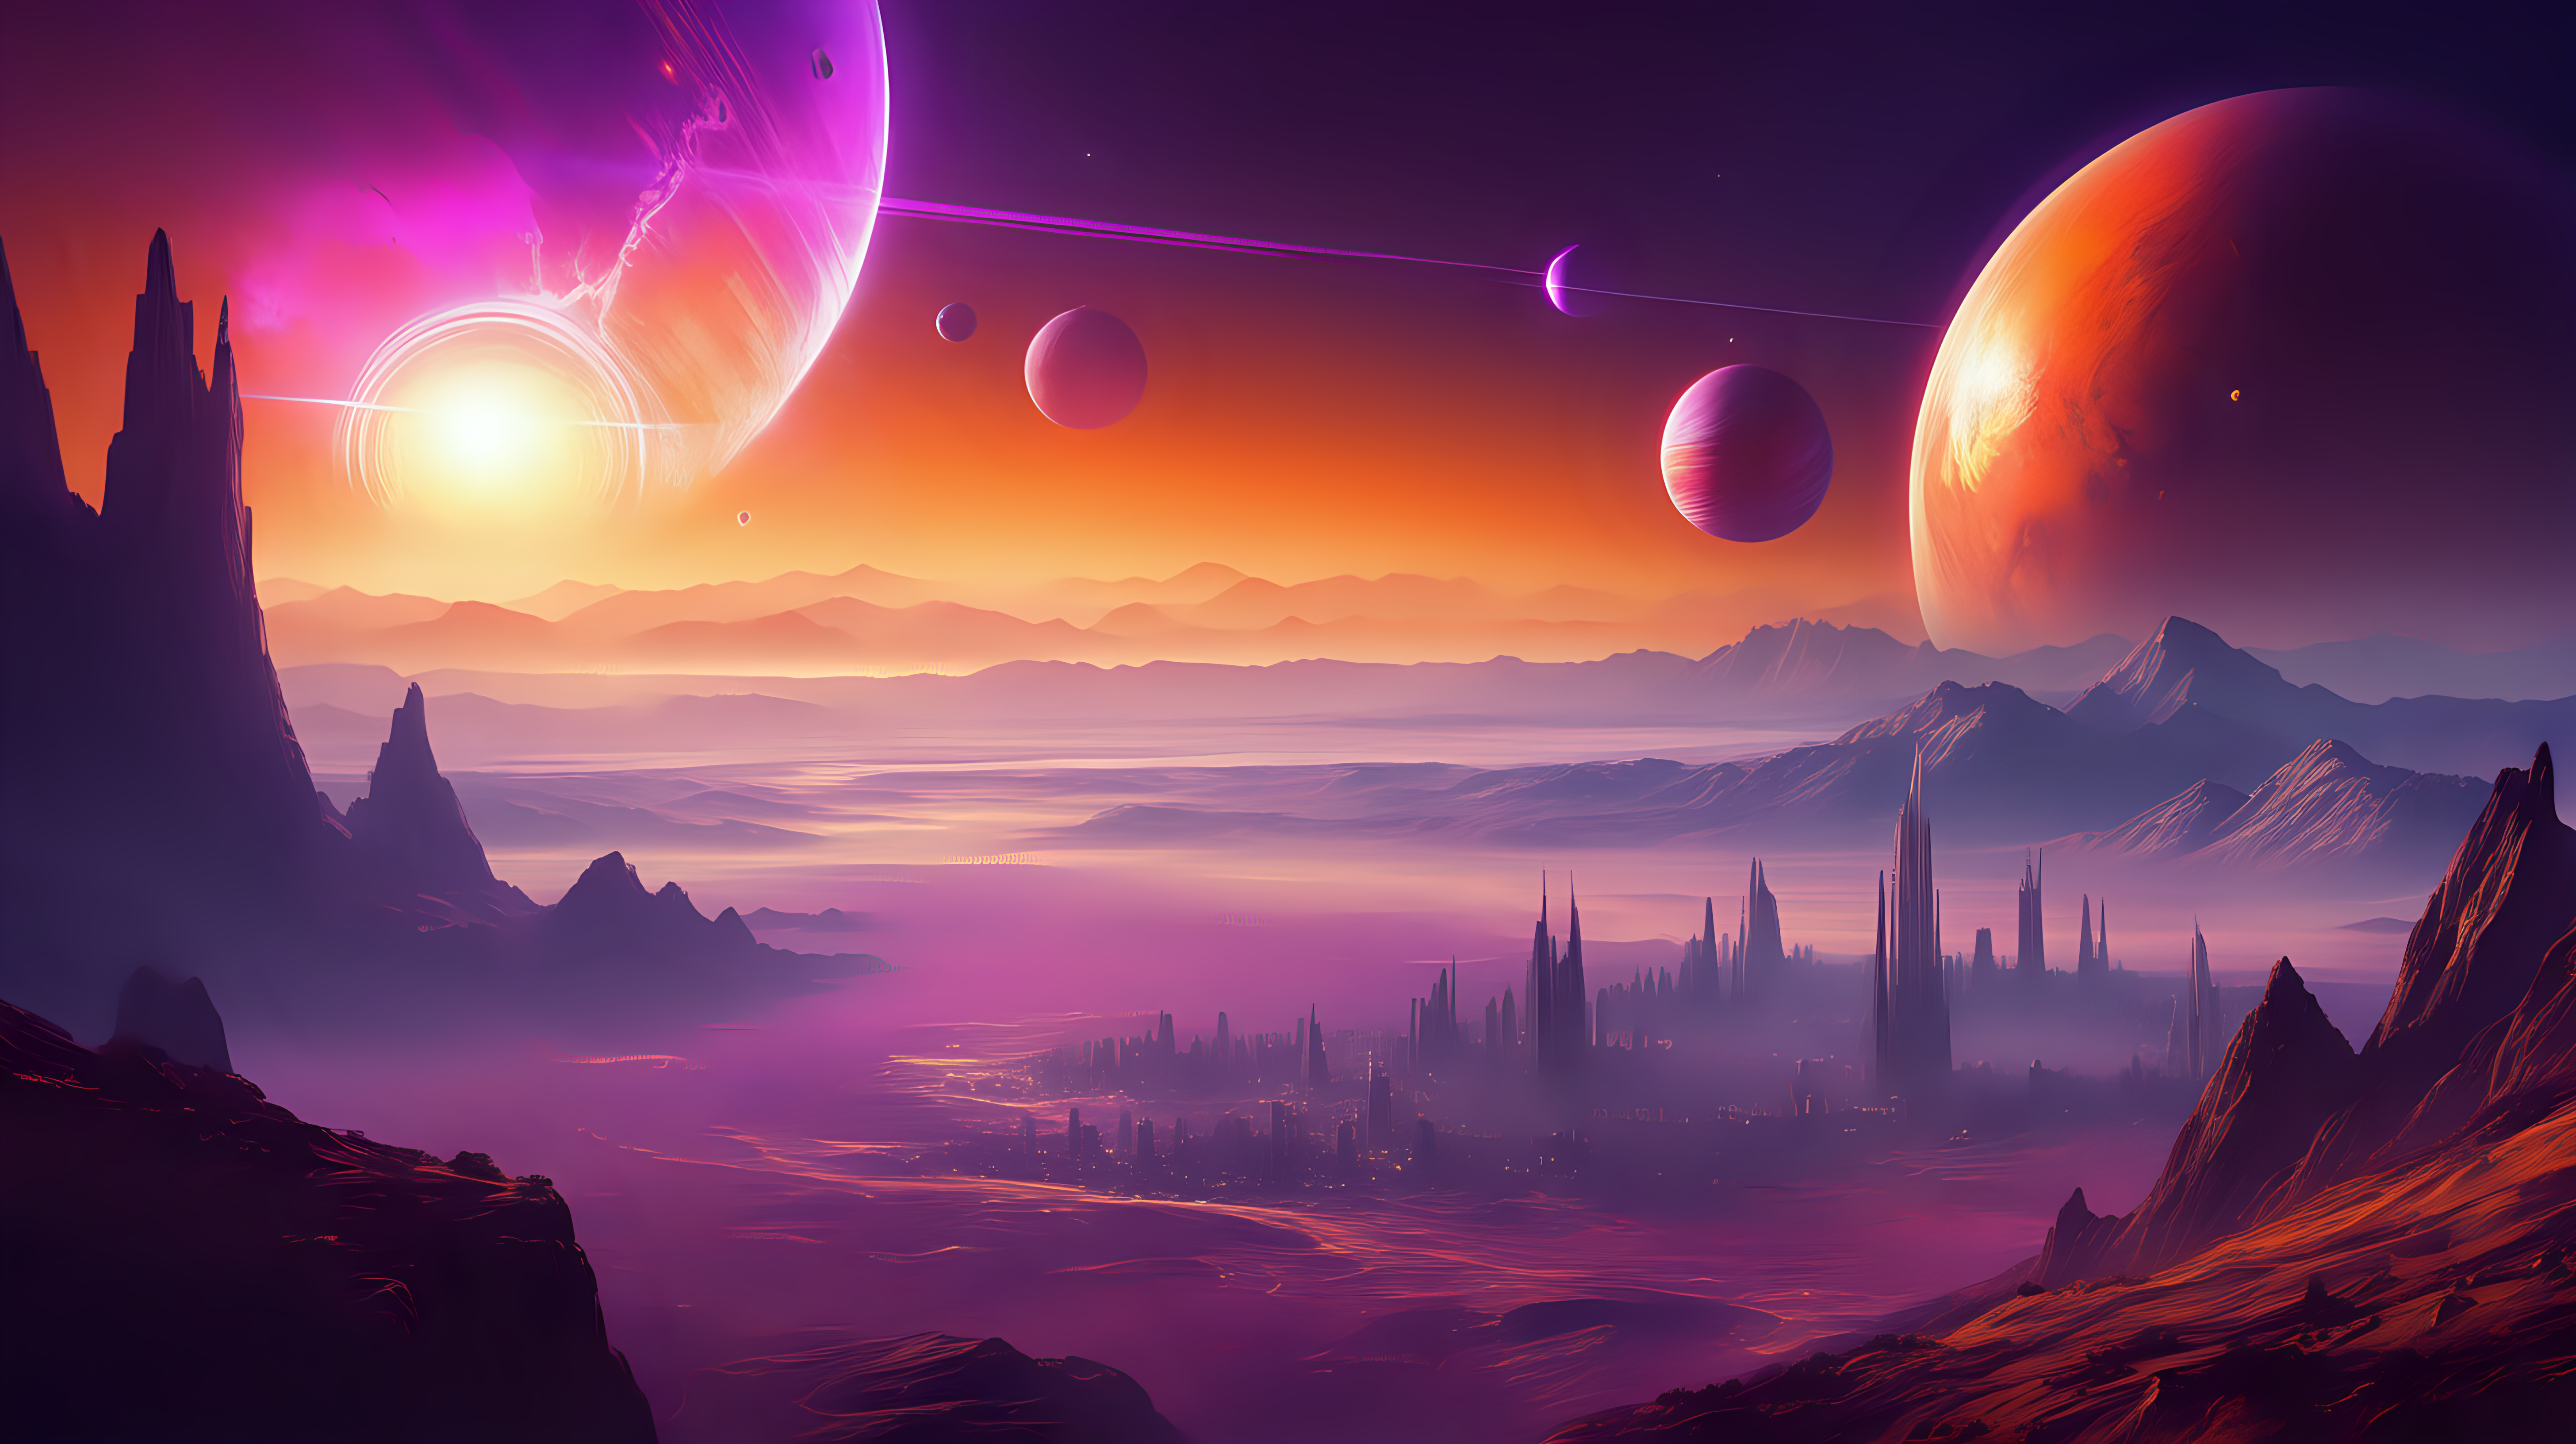 Make a fantastic fantasy and sci-fi picture with a lot of purple and orange color, distant planets, magnificent clods and the sun just setting in the distance, spectacular view, mountains here and there, distant cities and buildings in the valley, inspiration from the film Bladrunner.